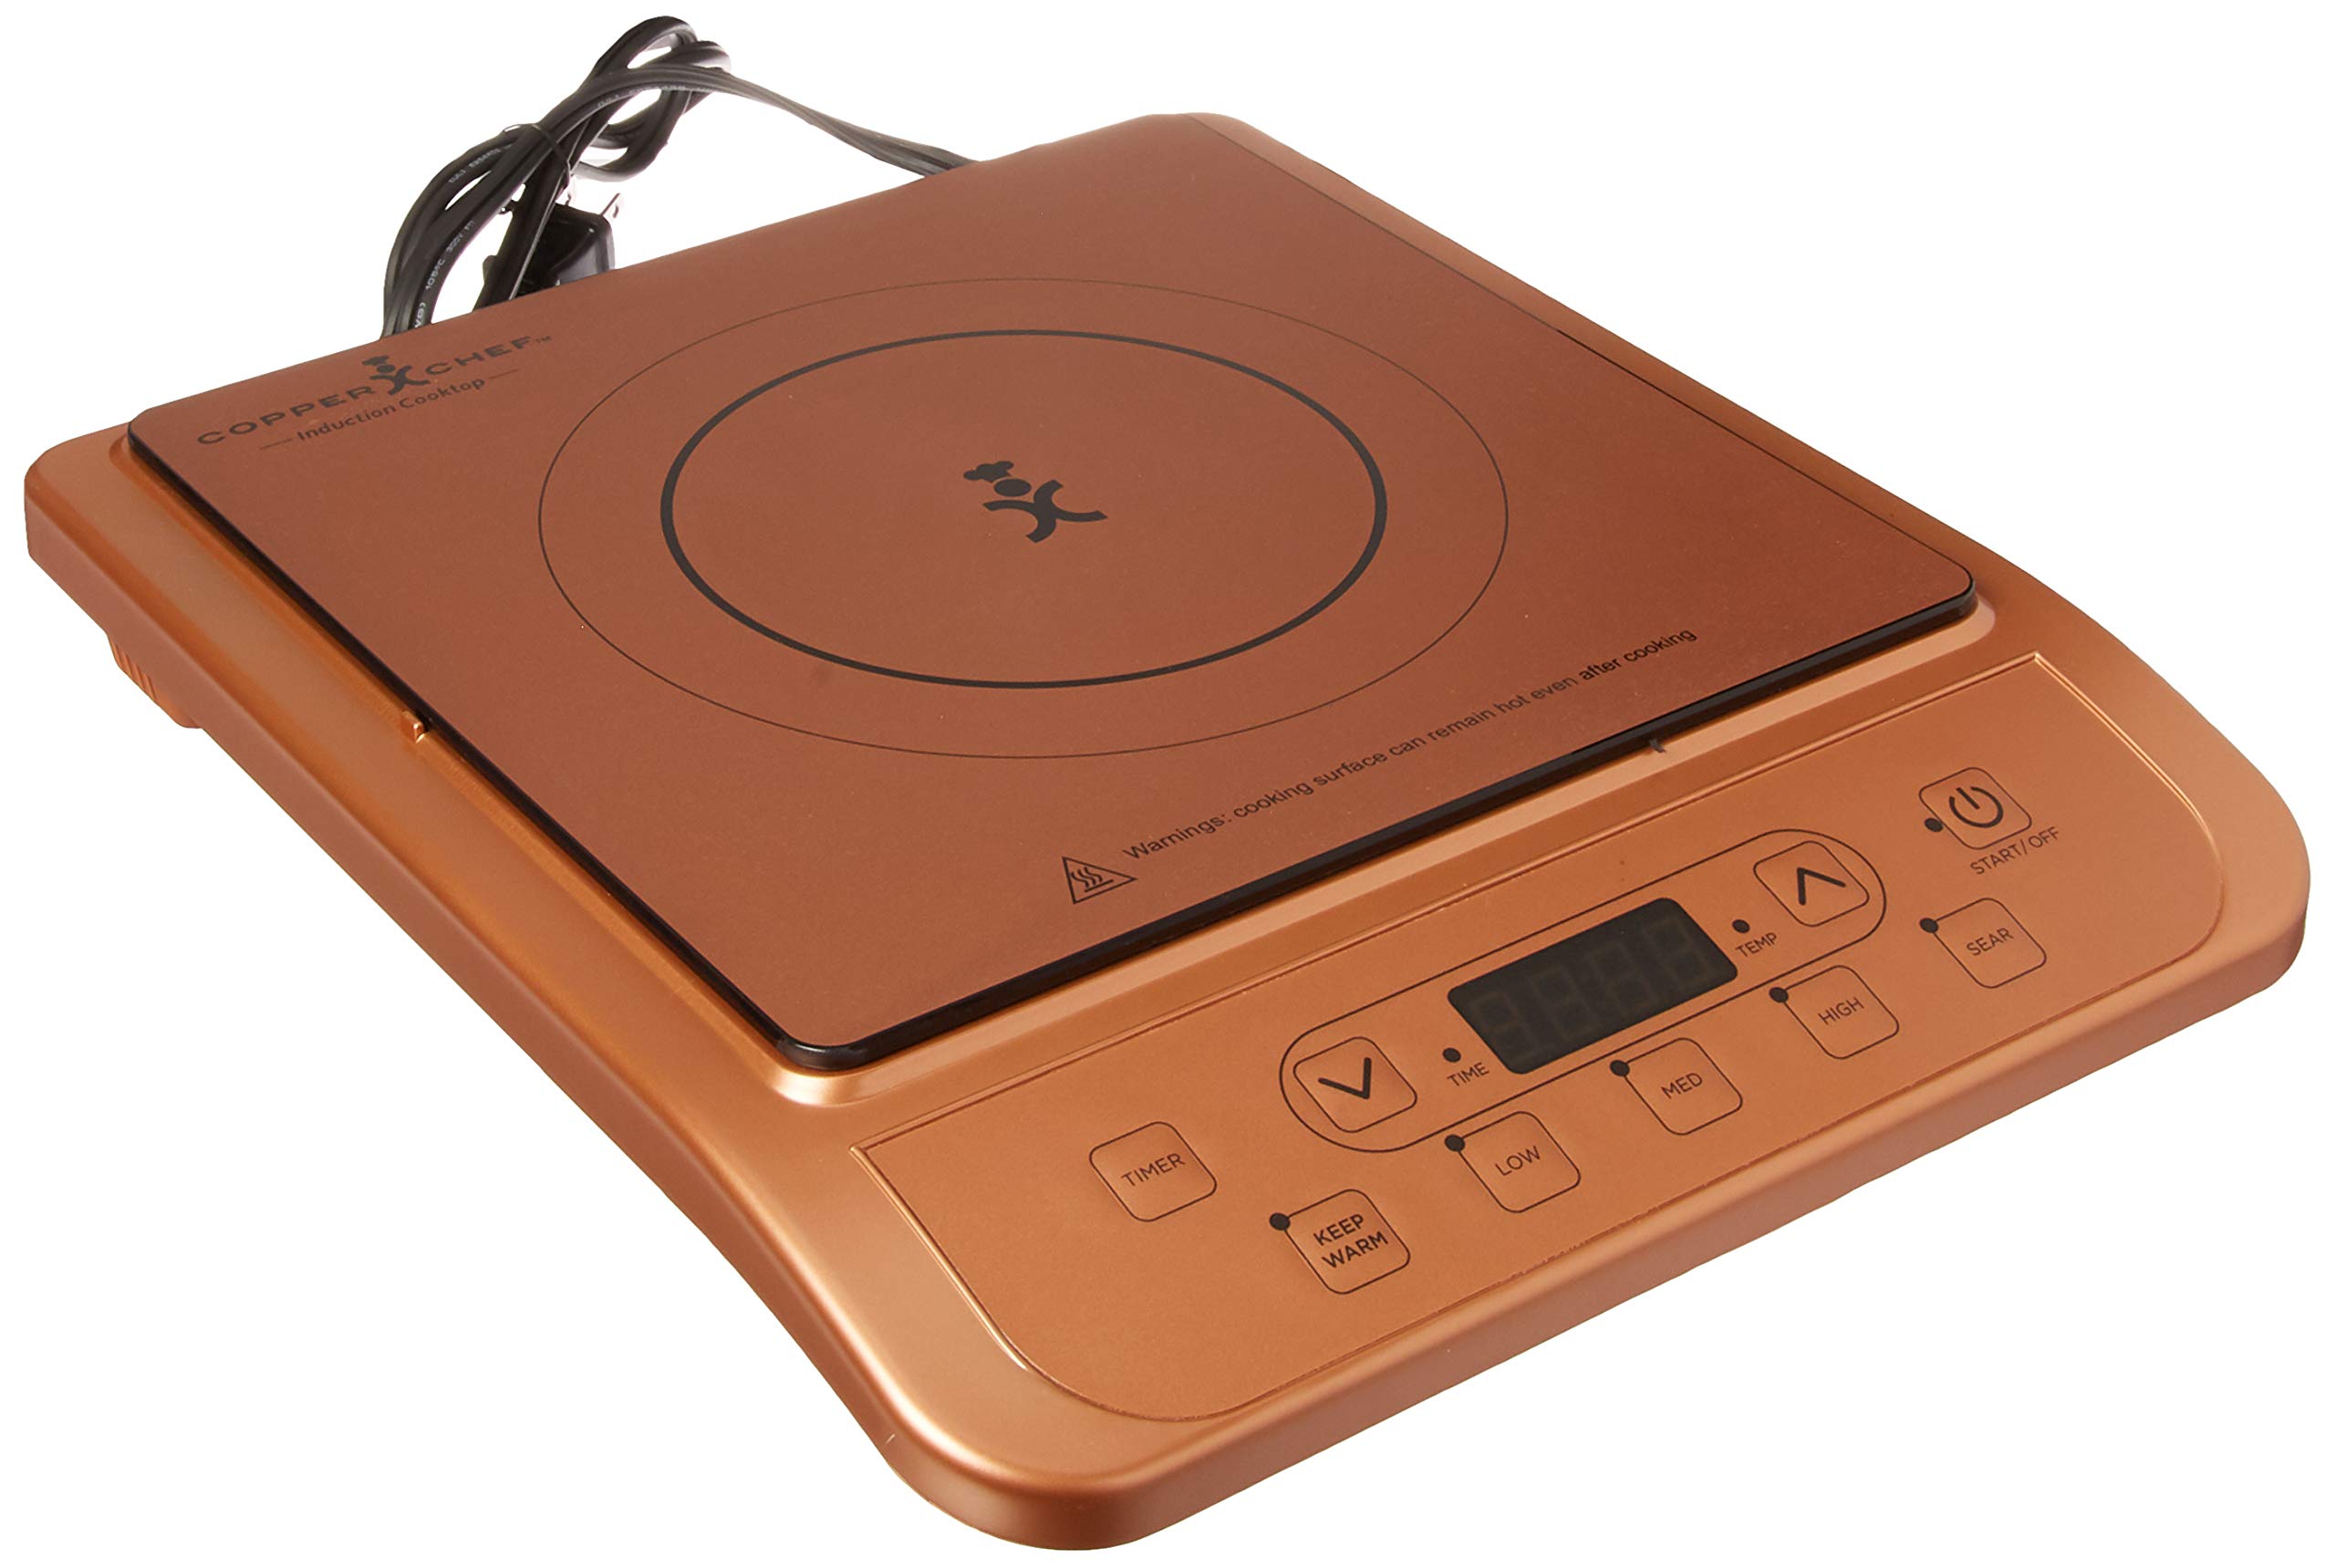 How To Use A Copper Chef Induction Cooktop